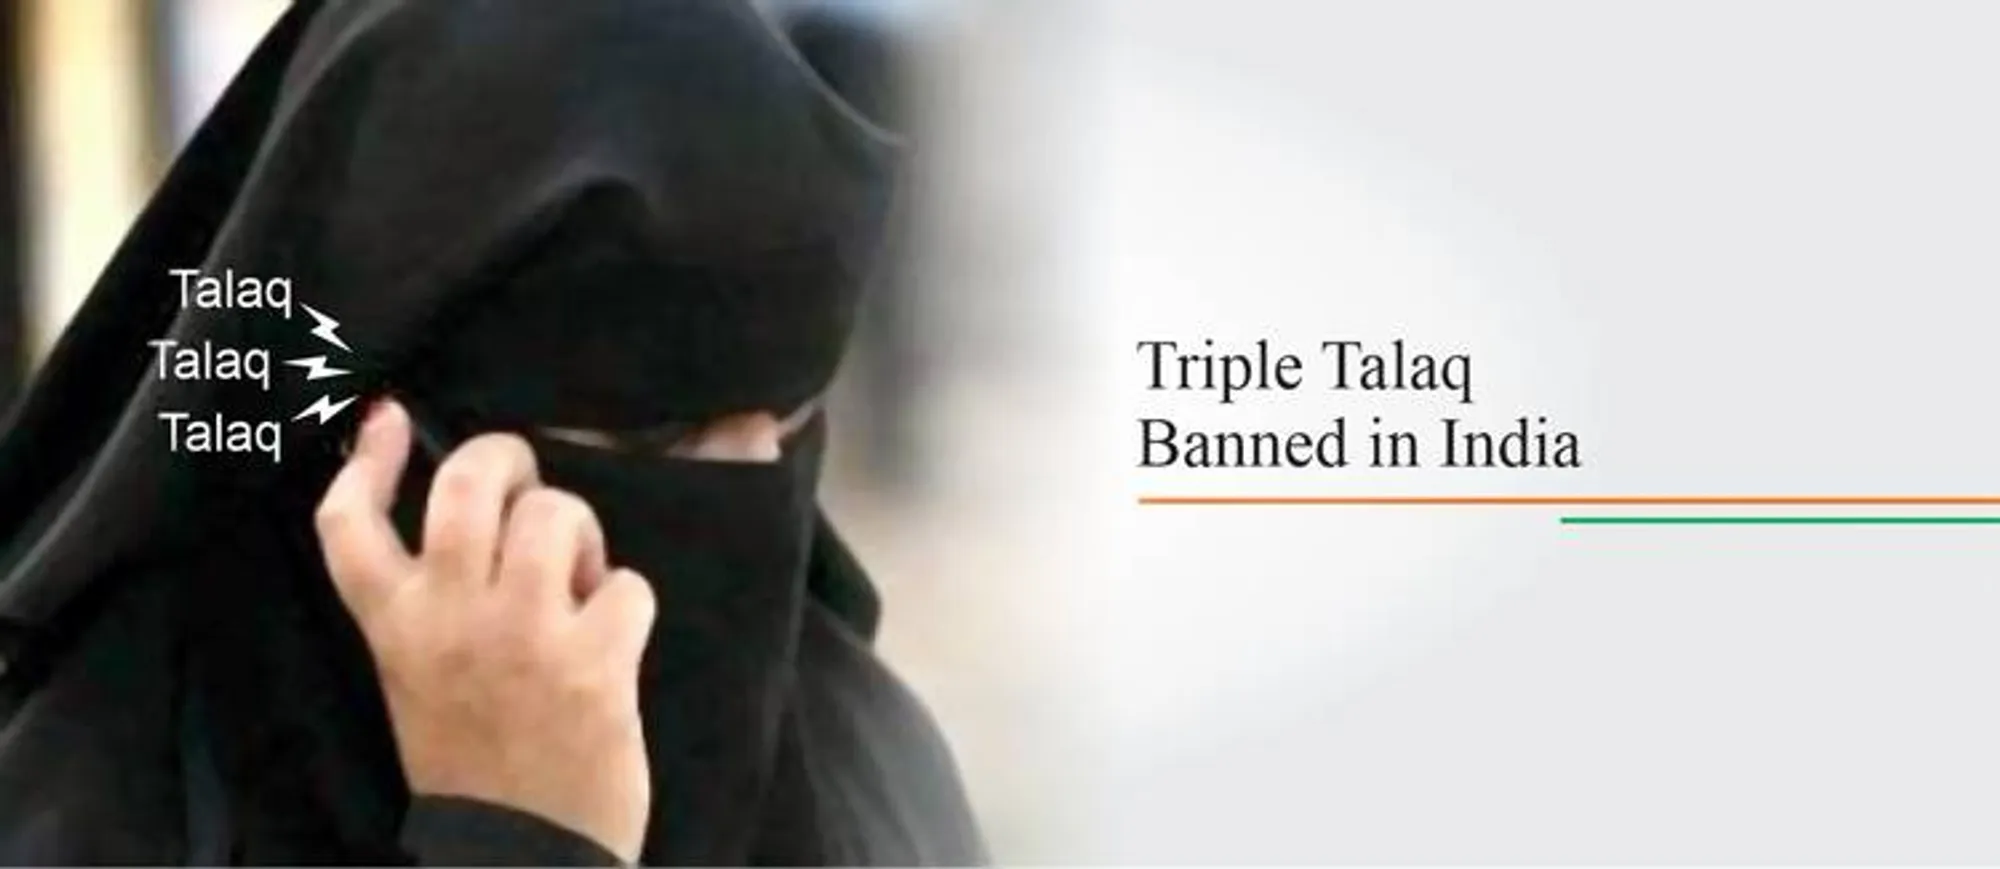 Triple Talaq Banned in India